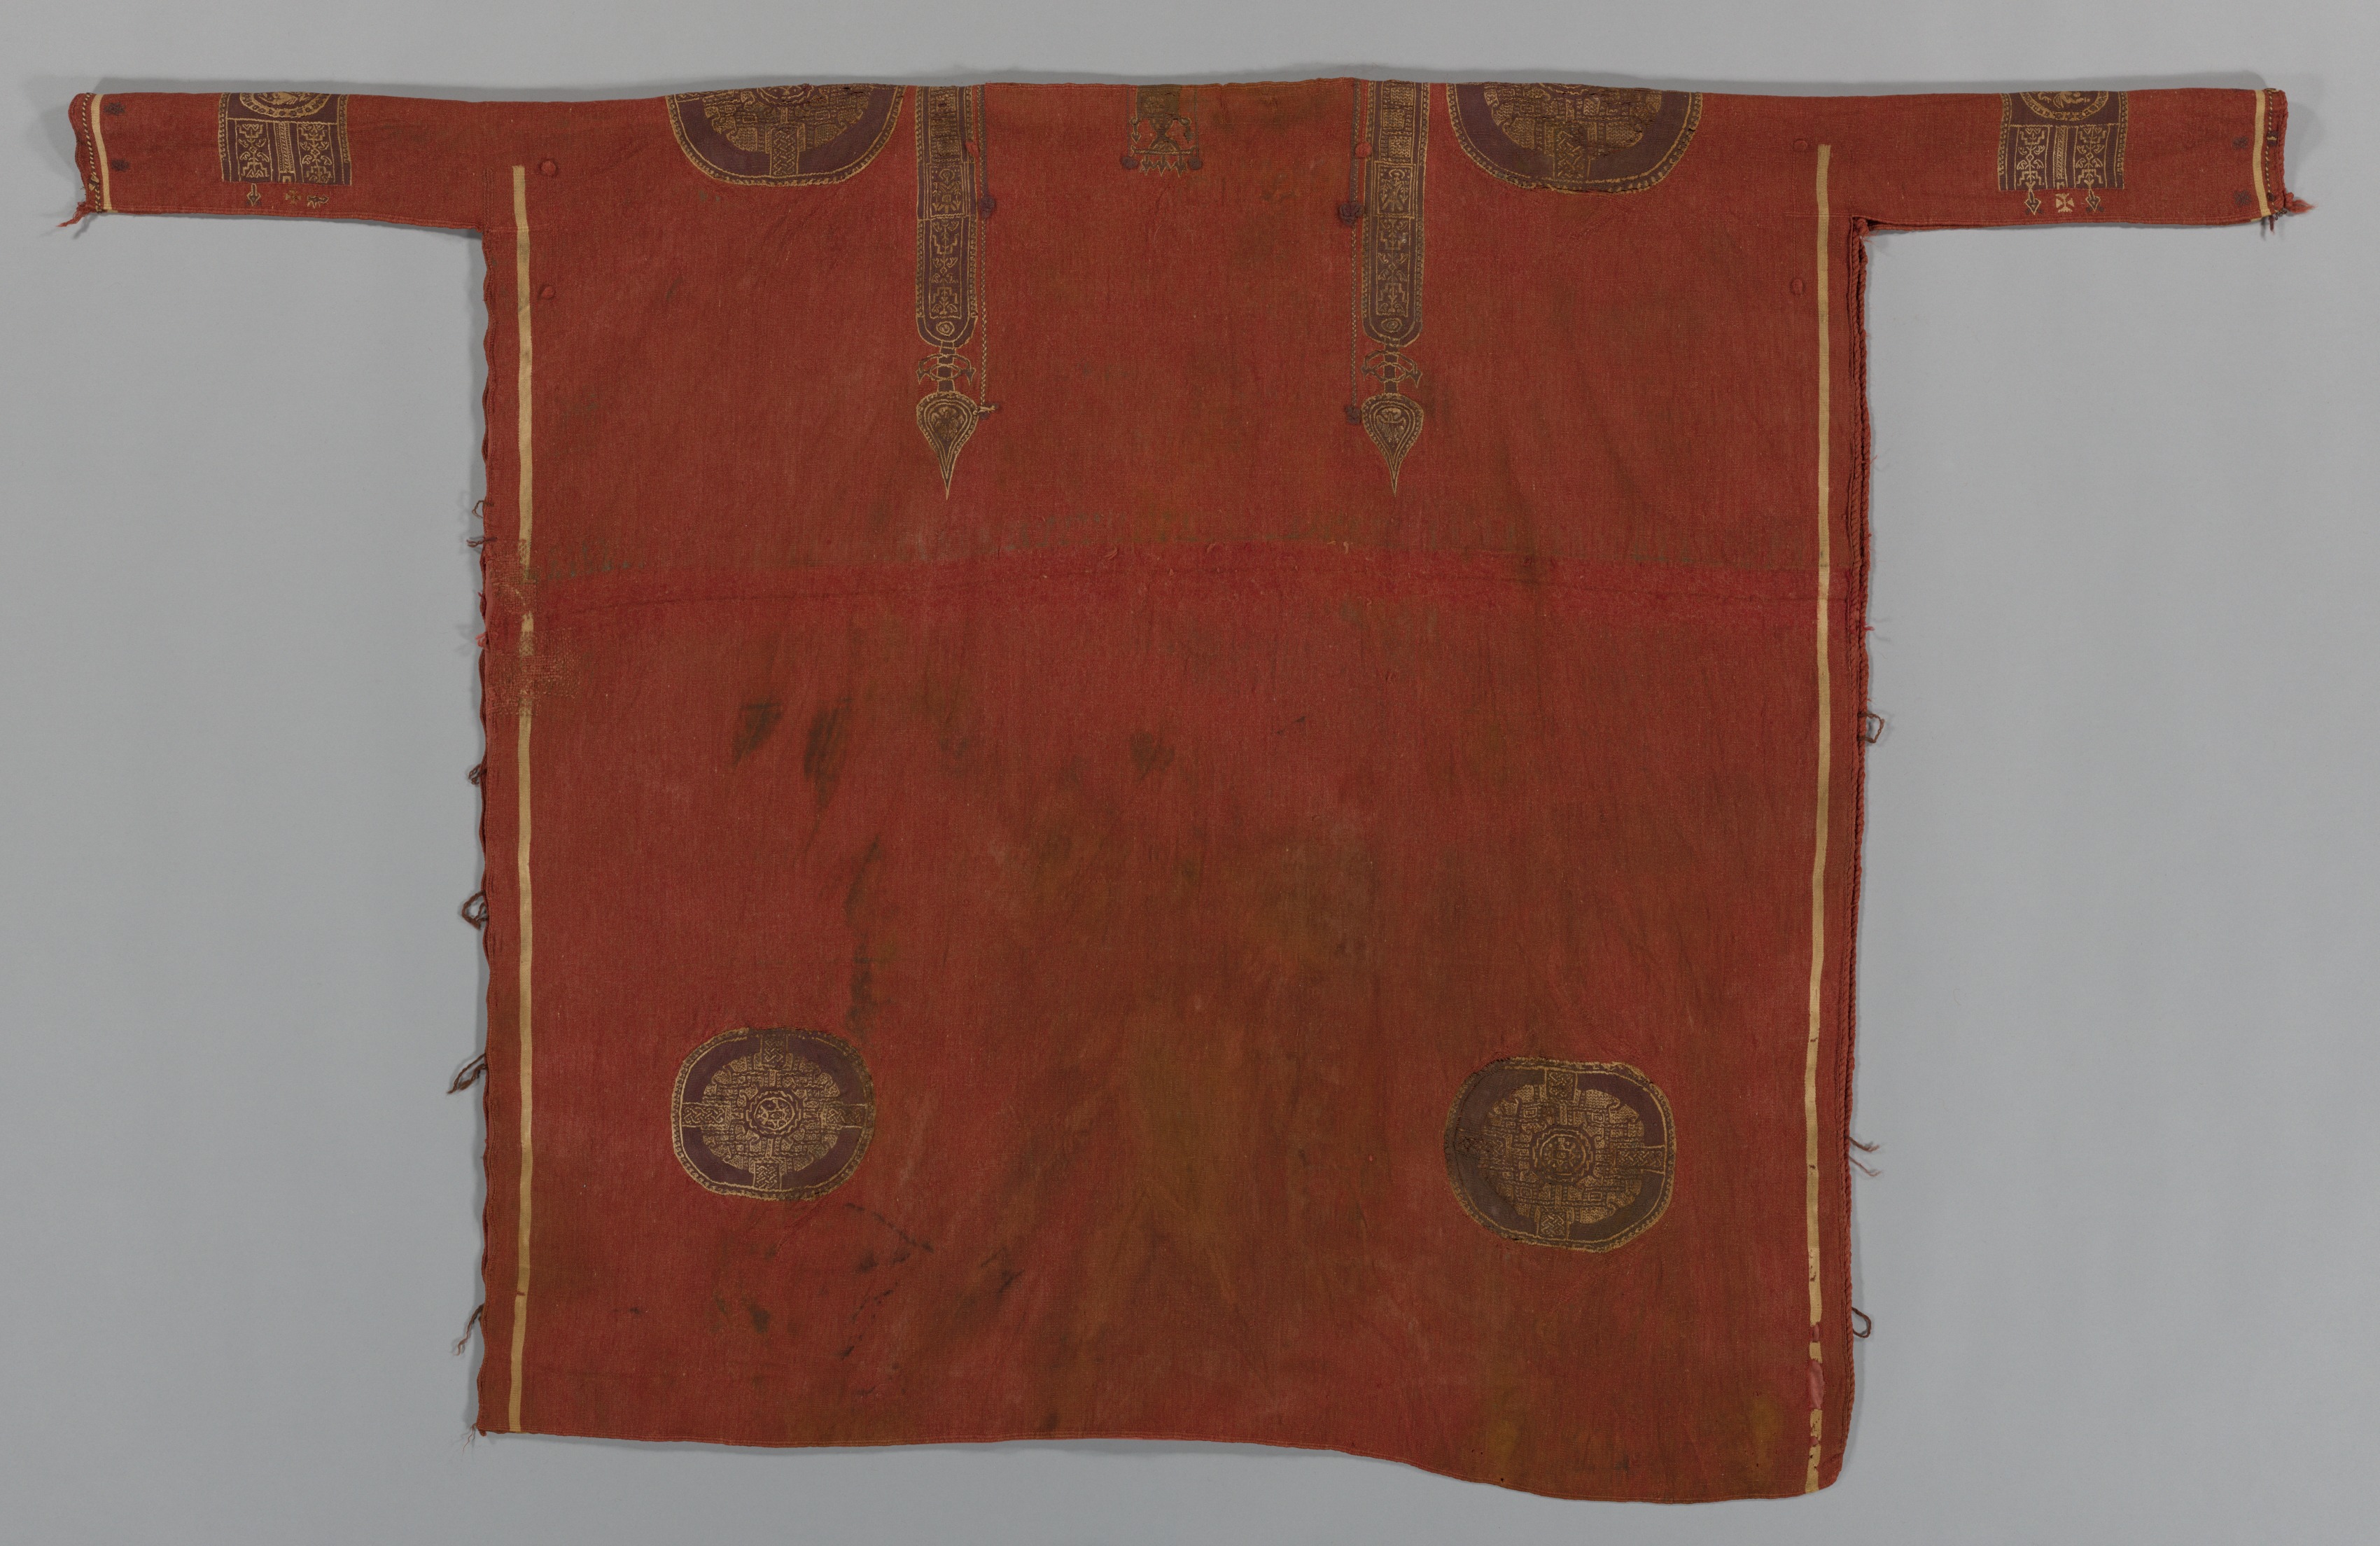 Luxurious Woolen Tunic with Decorated Bands
and Roundels